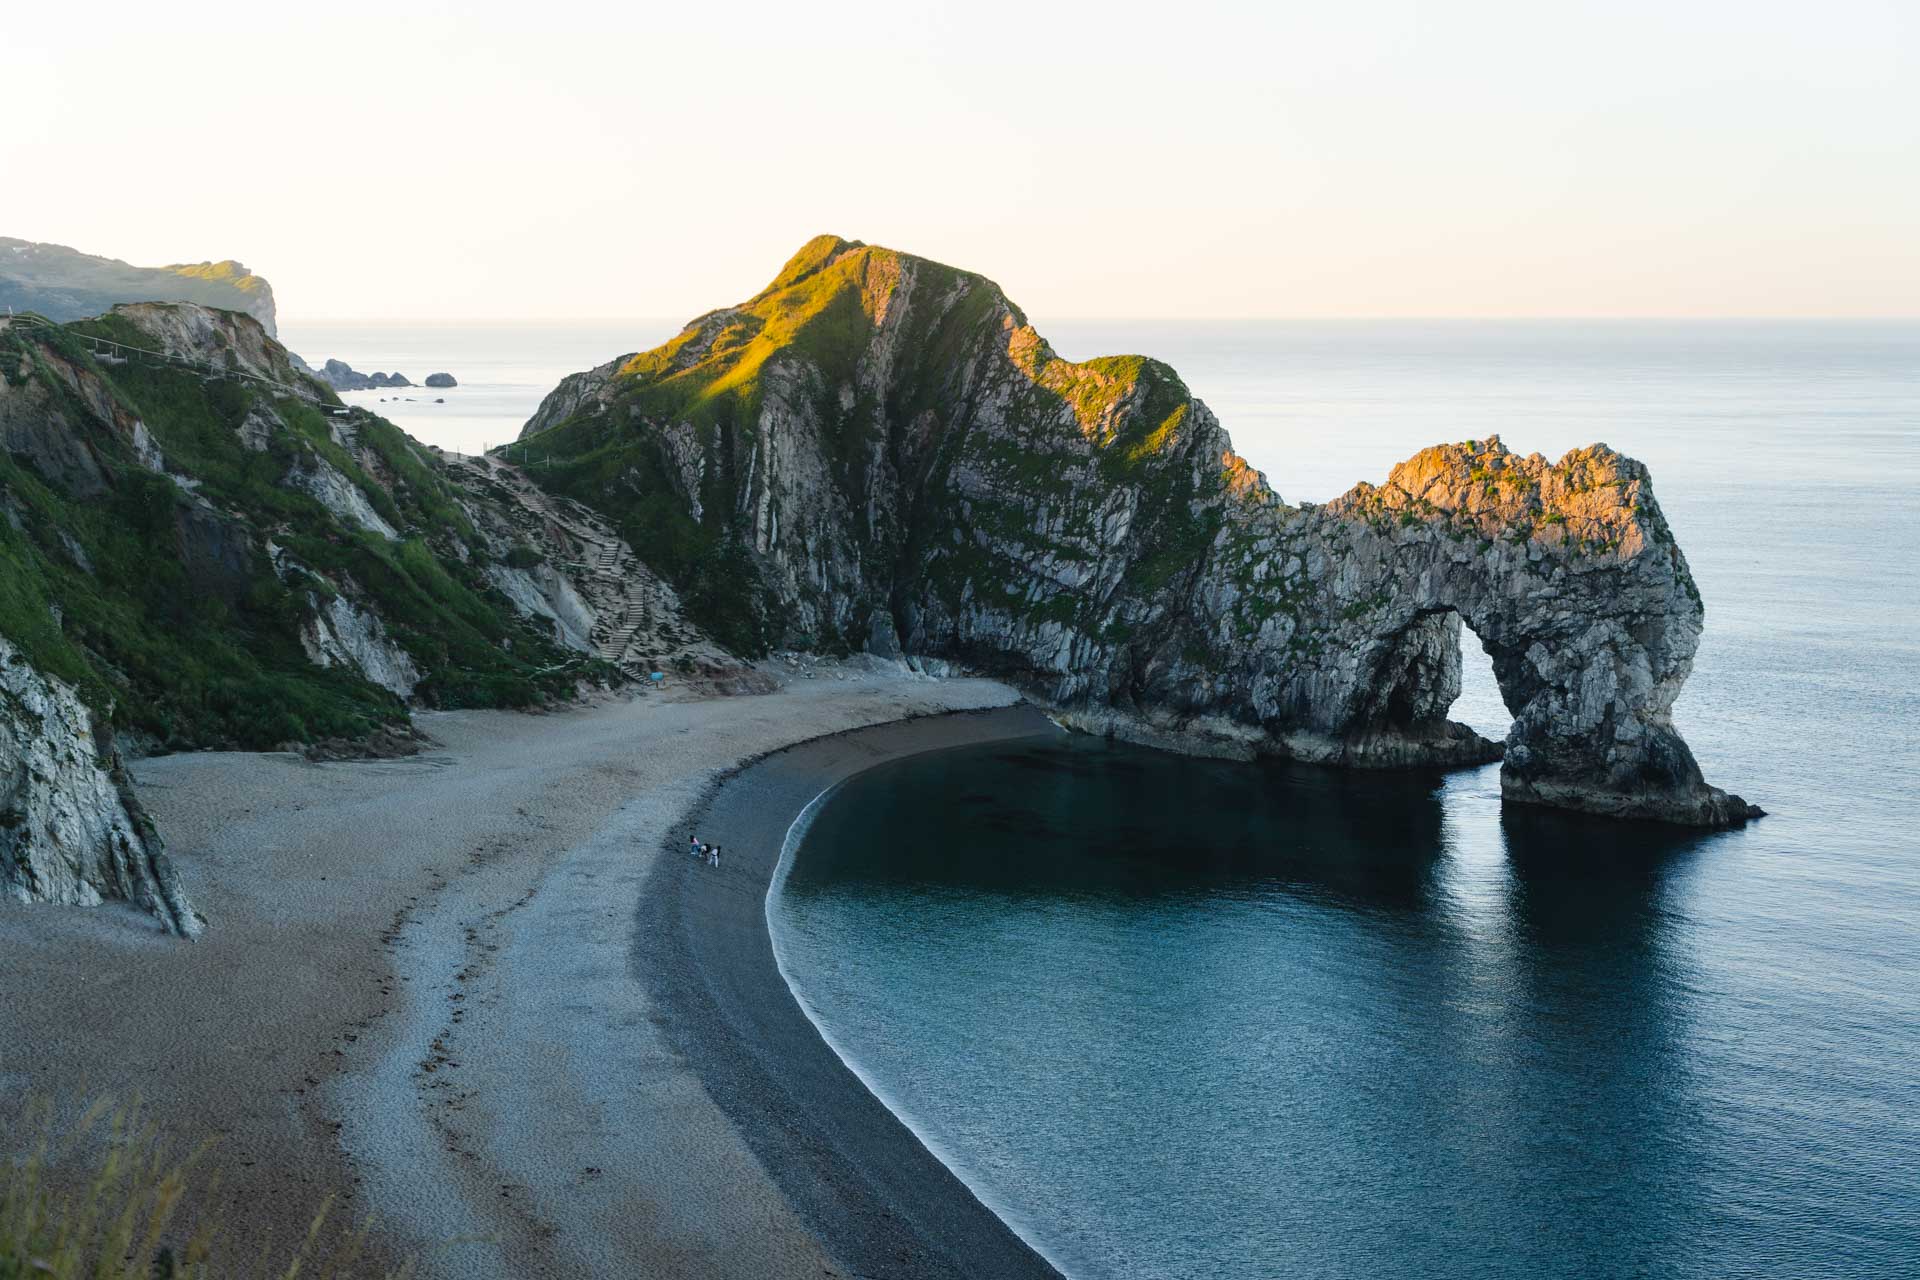 The Durdle Door rock formation in Dorset glowing in the sunrise light as two people look on from the beach.